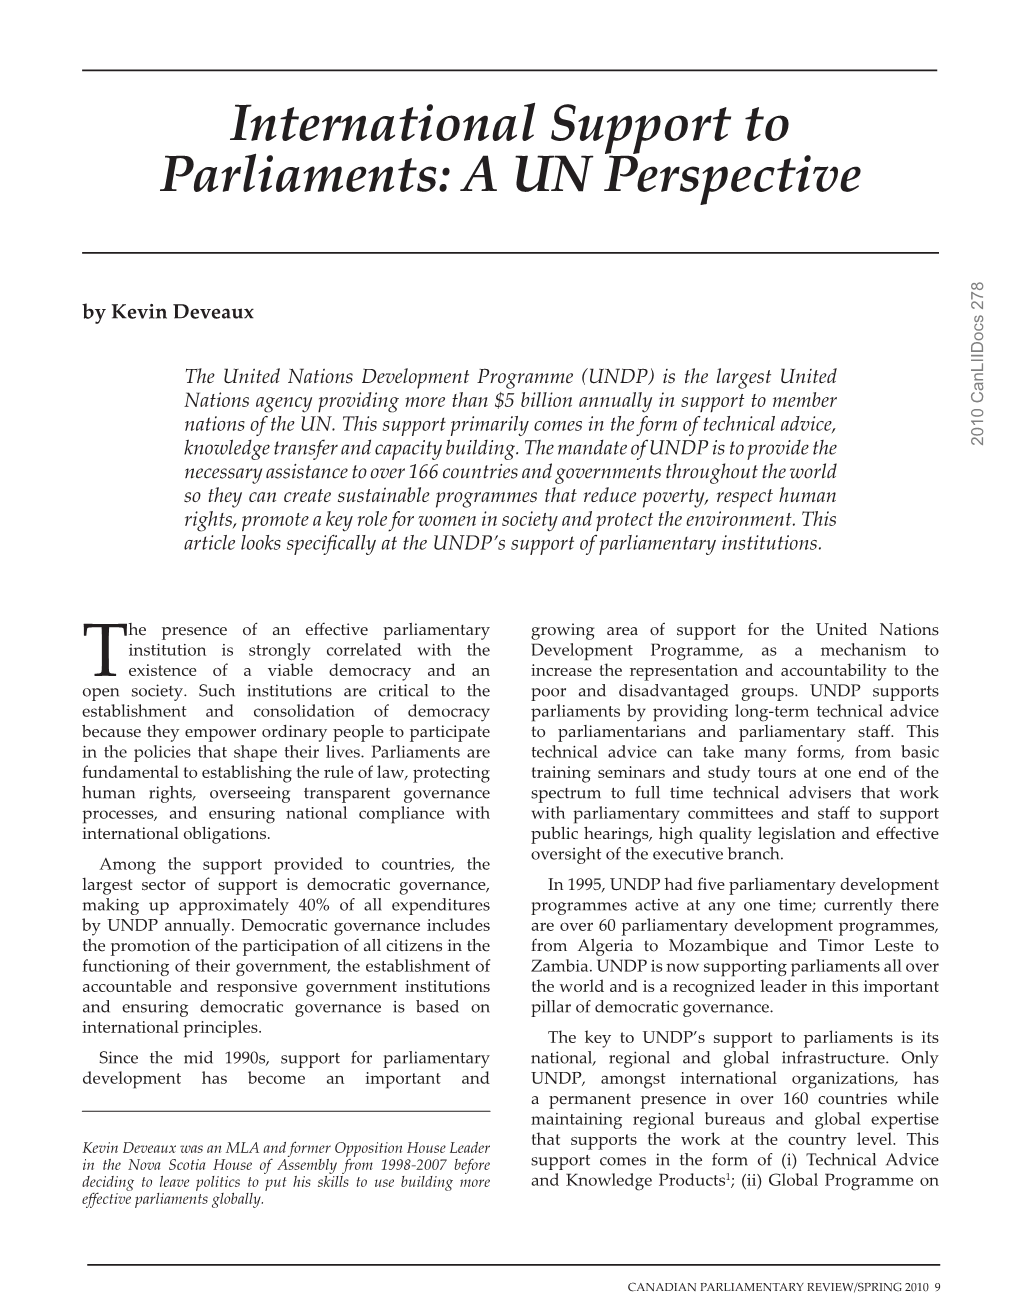 International Support to Parliaments: a UN Perspective